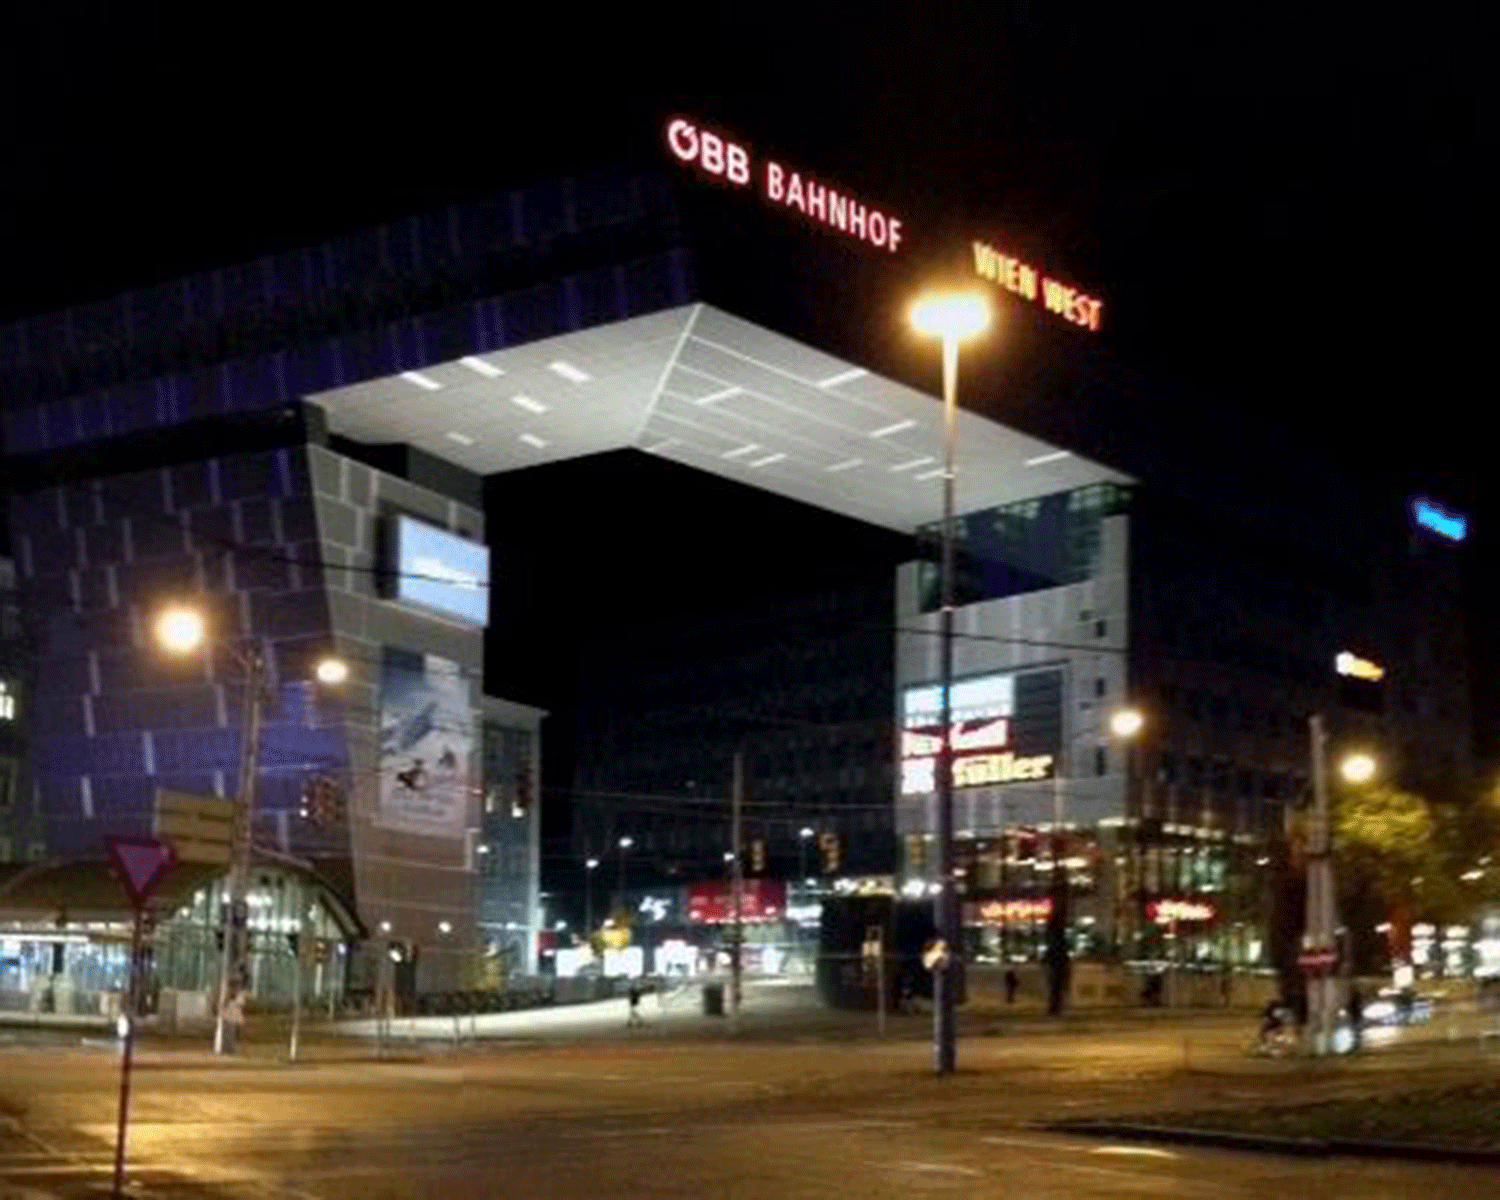 Westbahnhof train station in Vienna at night. A woman has said police told her not to go out at night